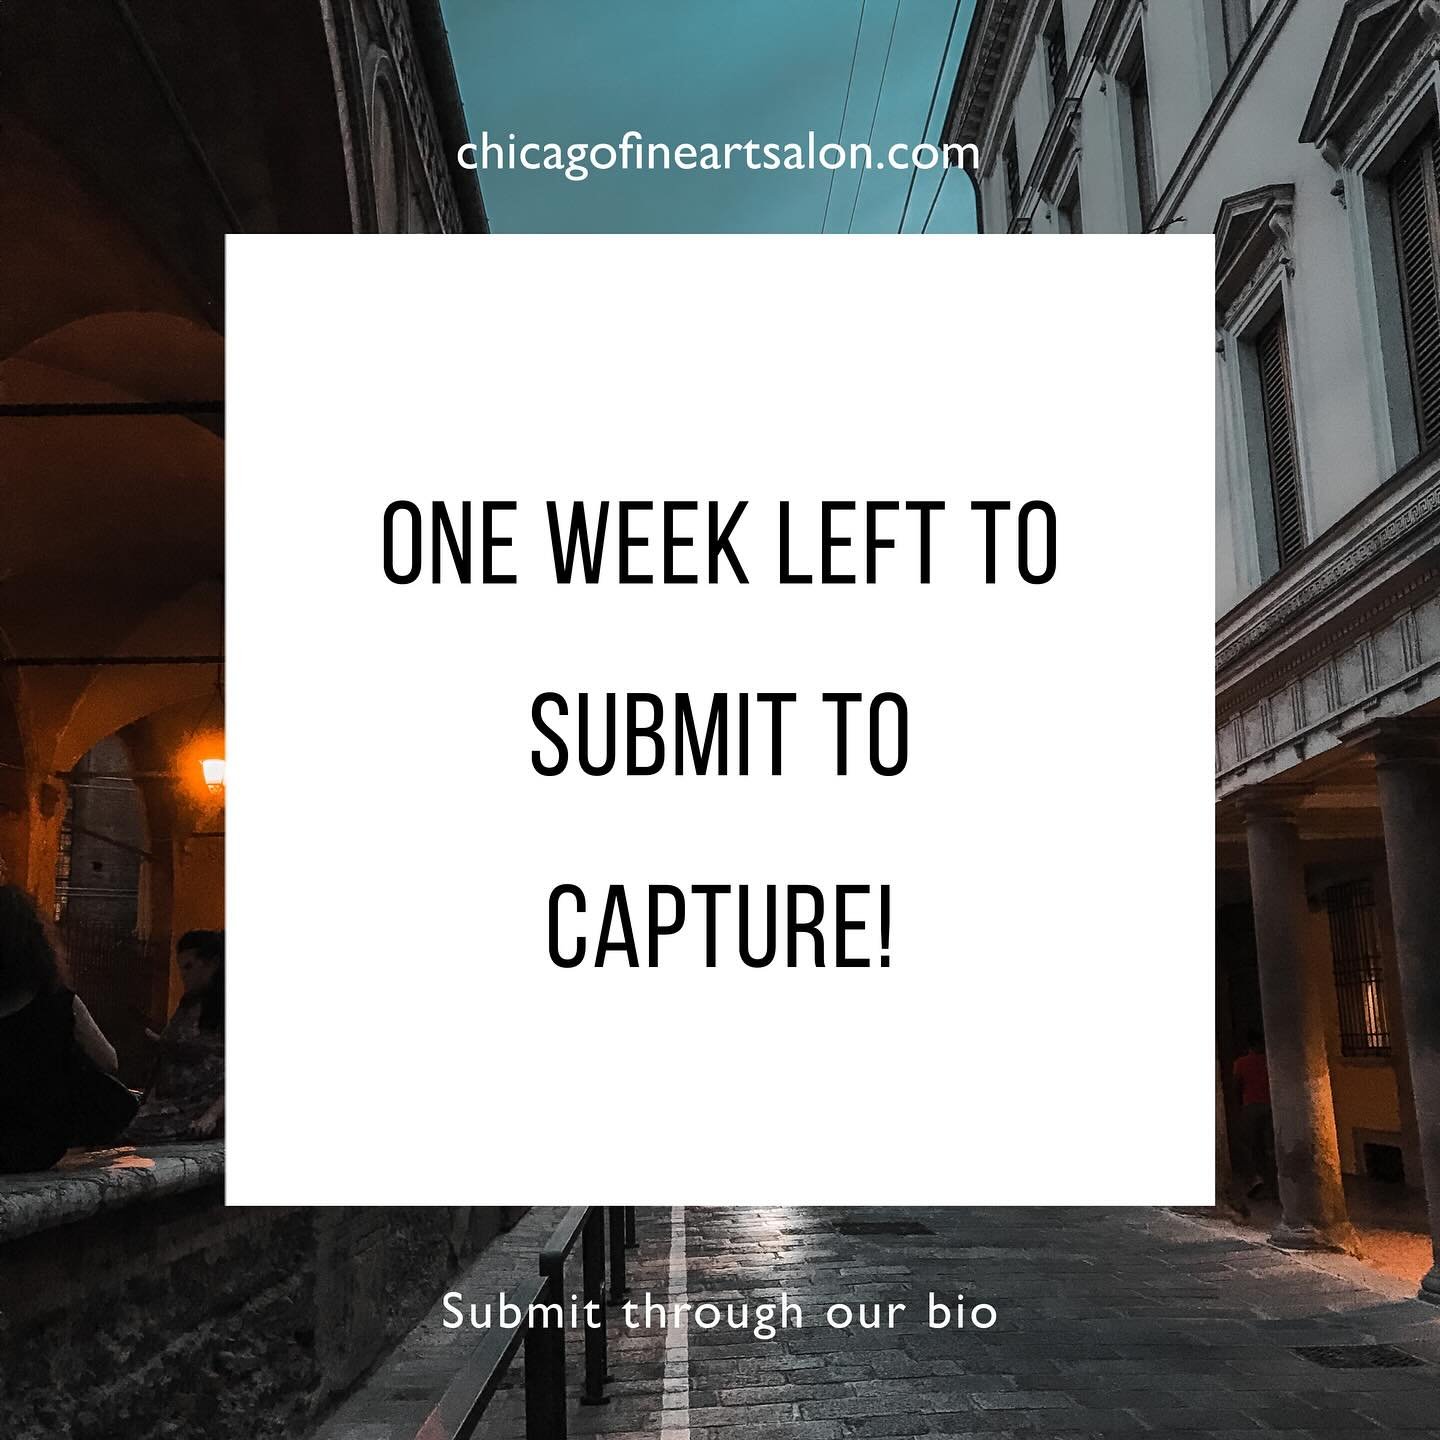 There&rsquo;s still time to submit to our #callforphotography show CAPTURE! 📷

Whether you&rsquo;re an amateur or professional photographer, we want to see you work! Submit a single photo or series by visiting our website chicagofineartsalon.com or 